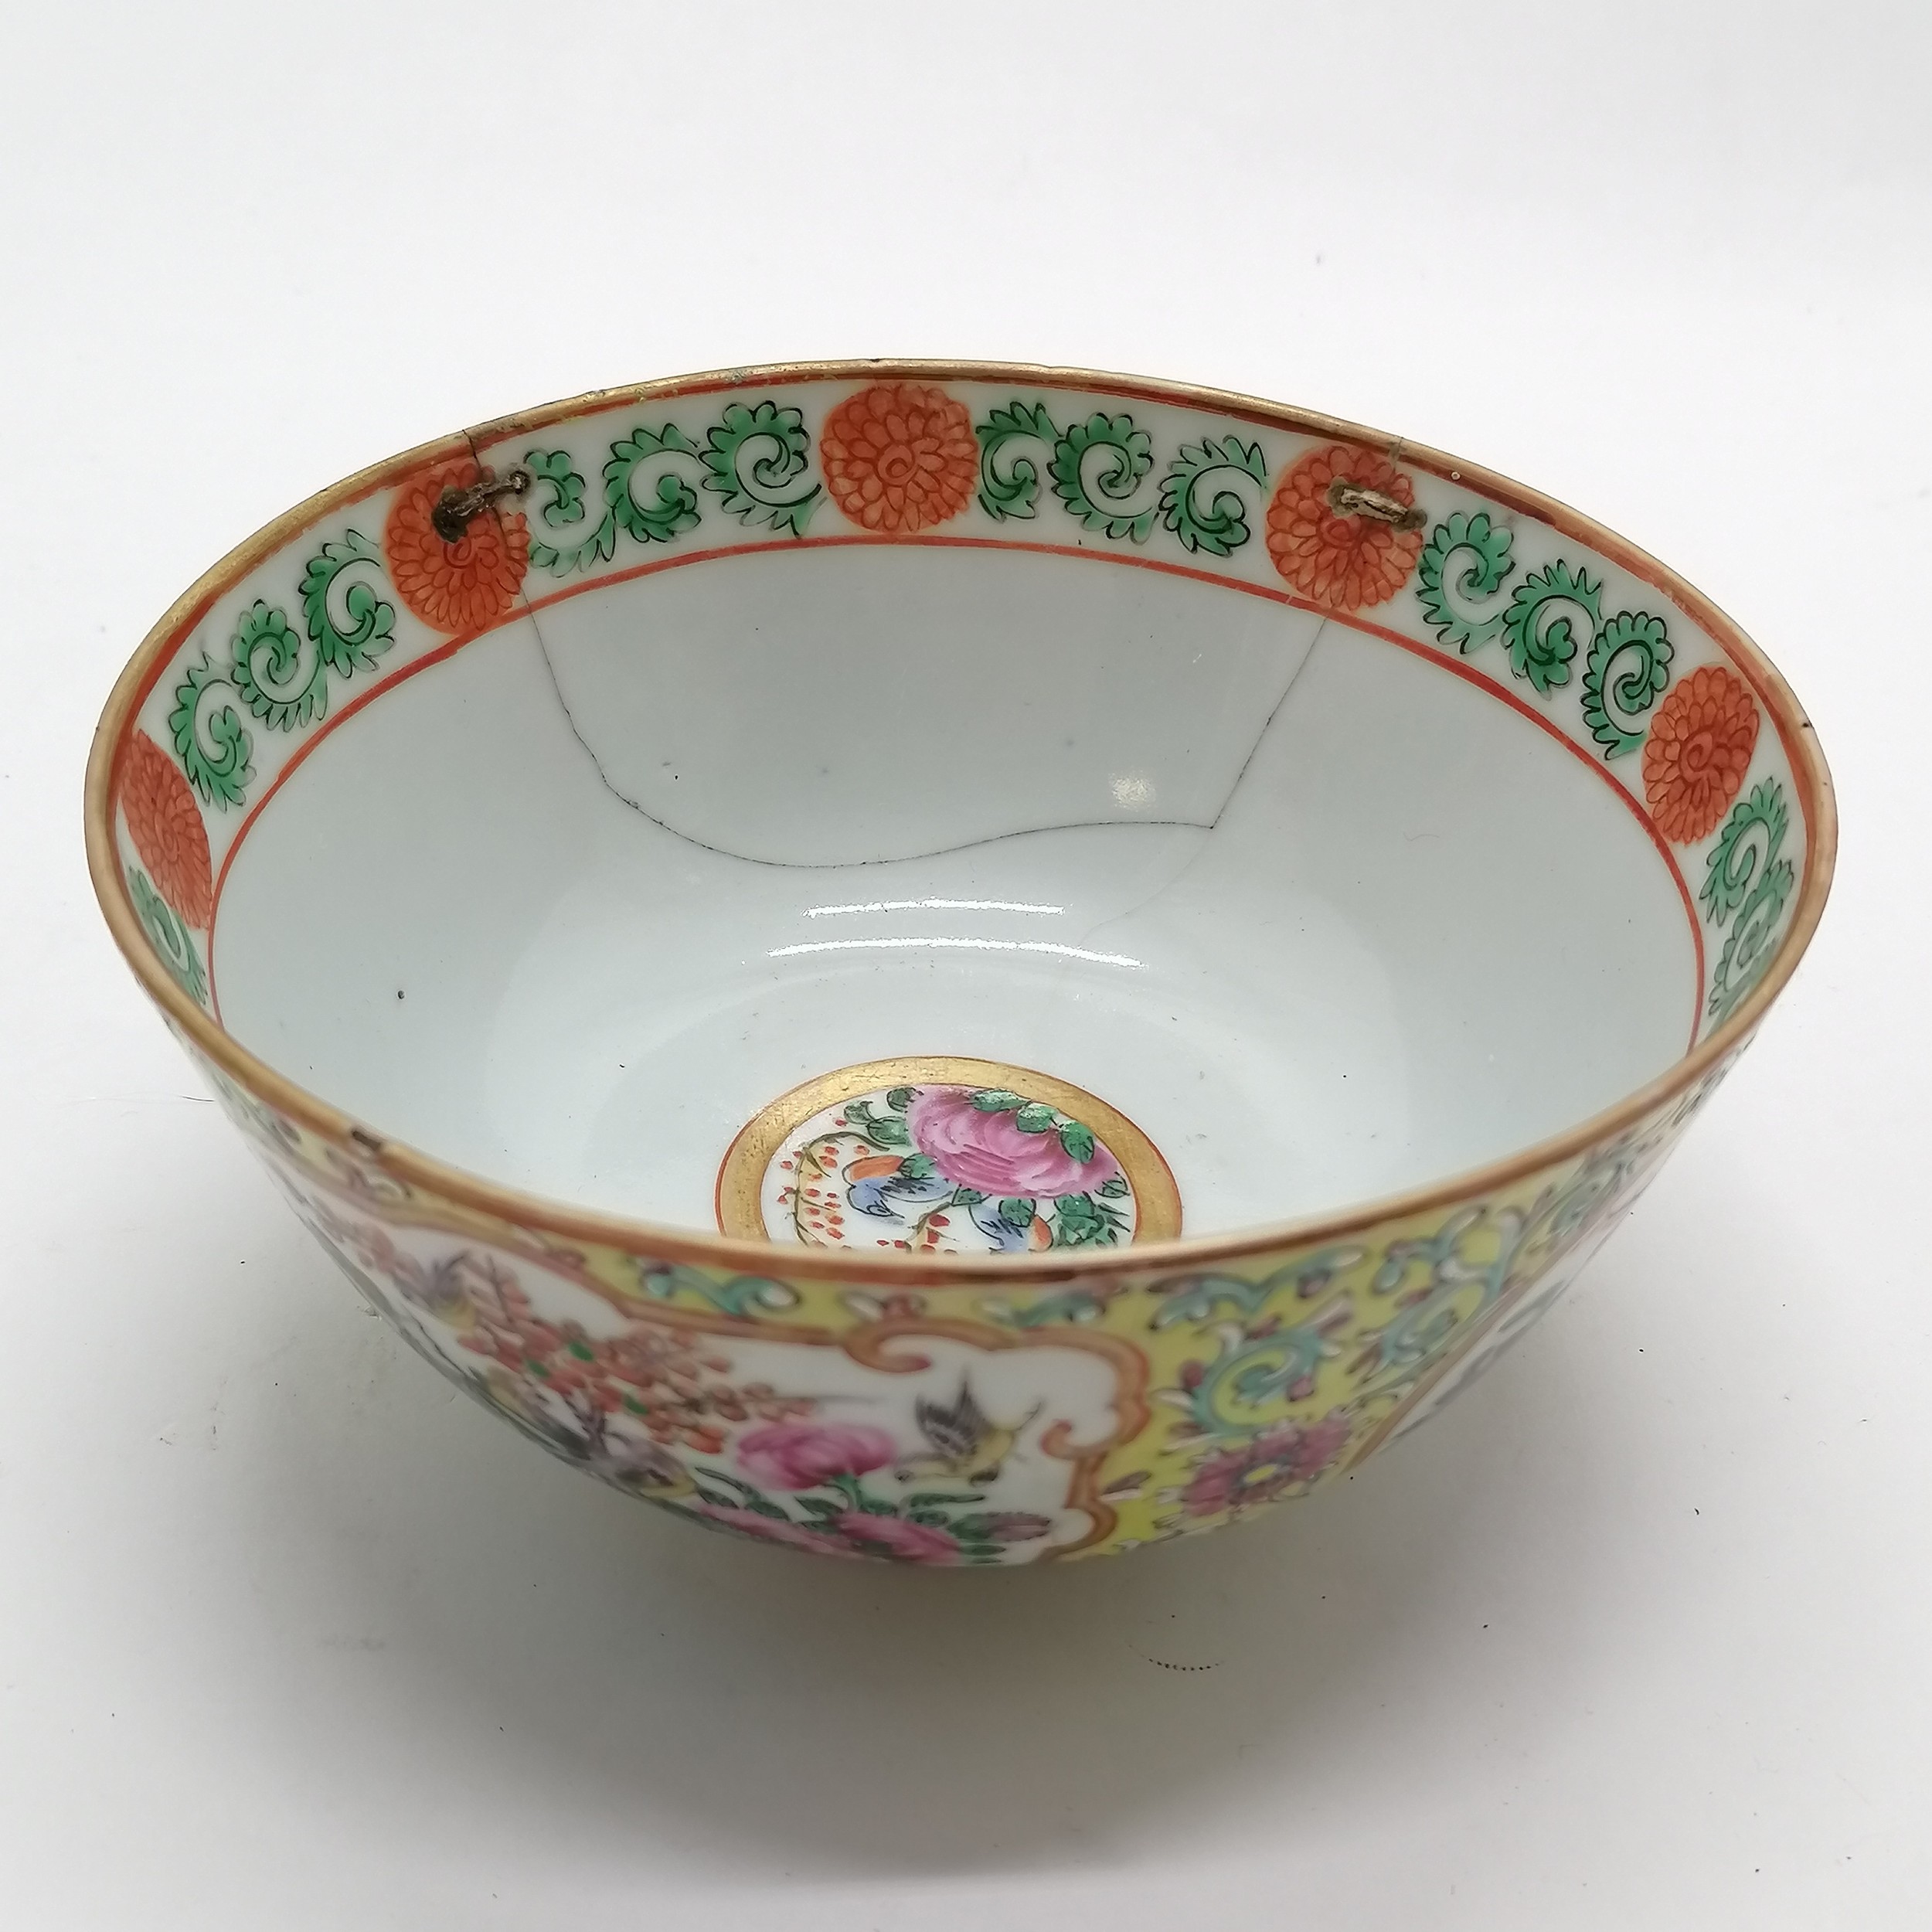 Antique Chinese famille rose bowl - yellow grounded with profuse floral & butterfly & bird (inc - Image 10 of 10